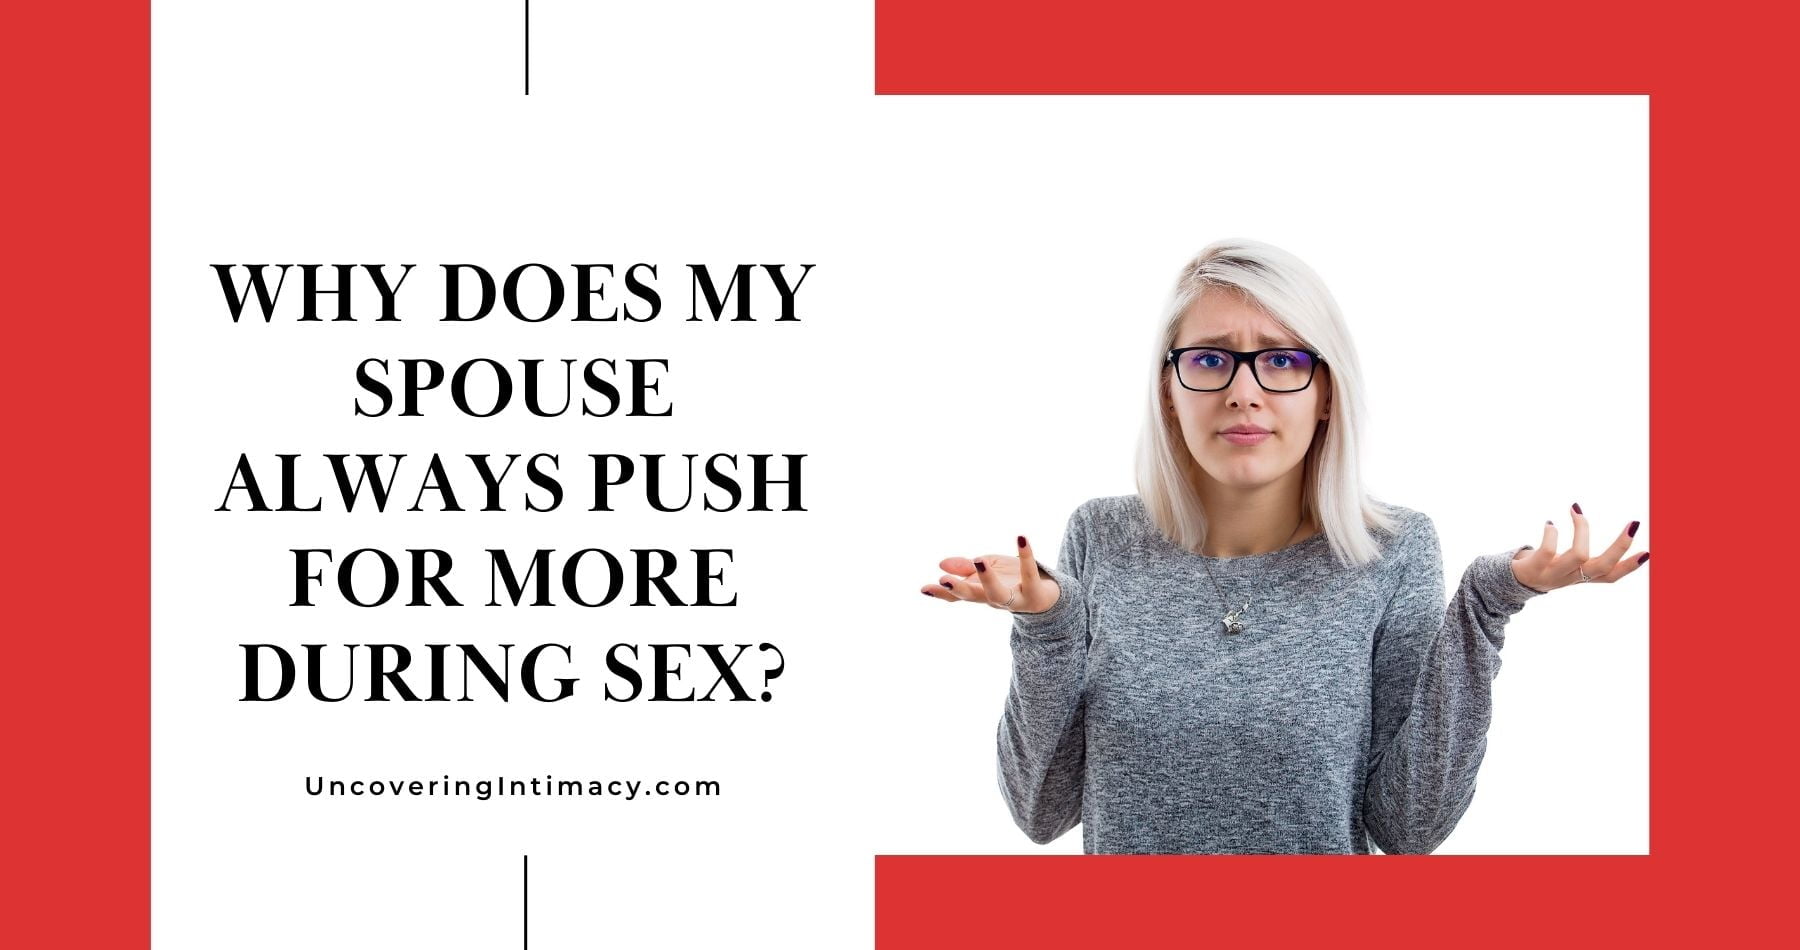 SWM 101 - Why does my spouse always push for more during sex? pic